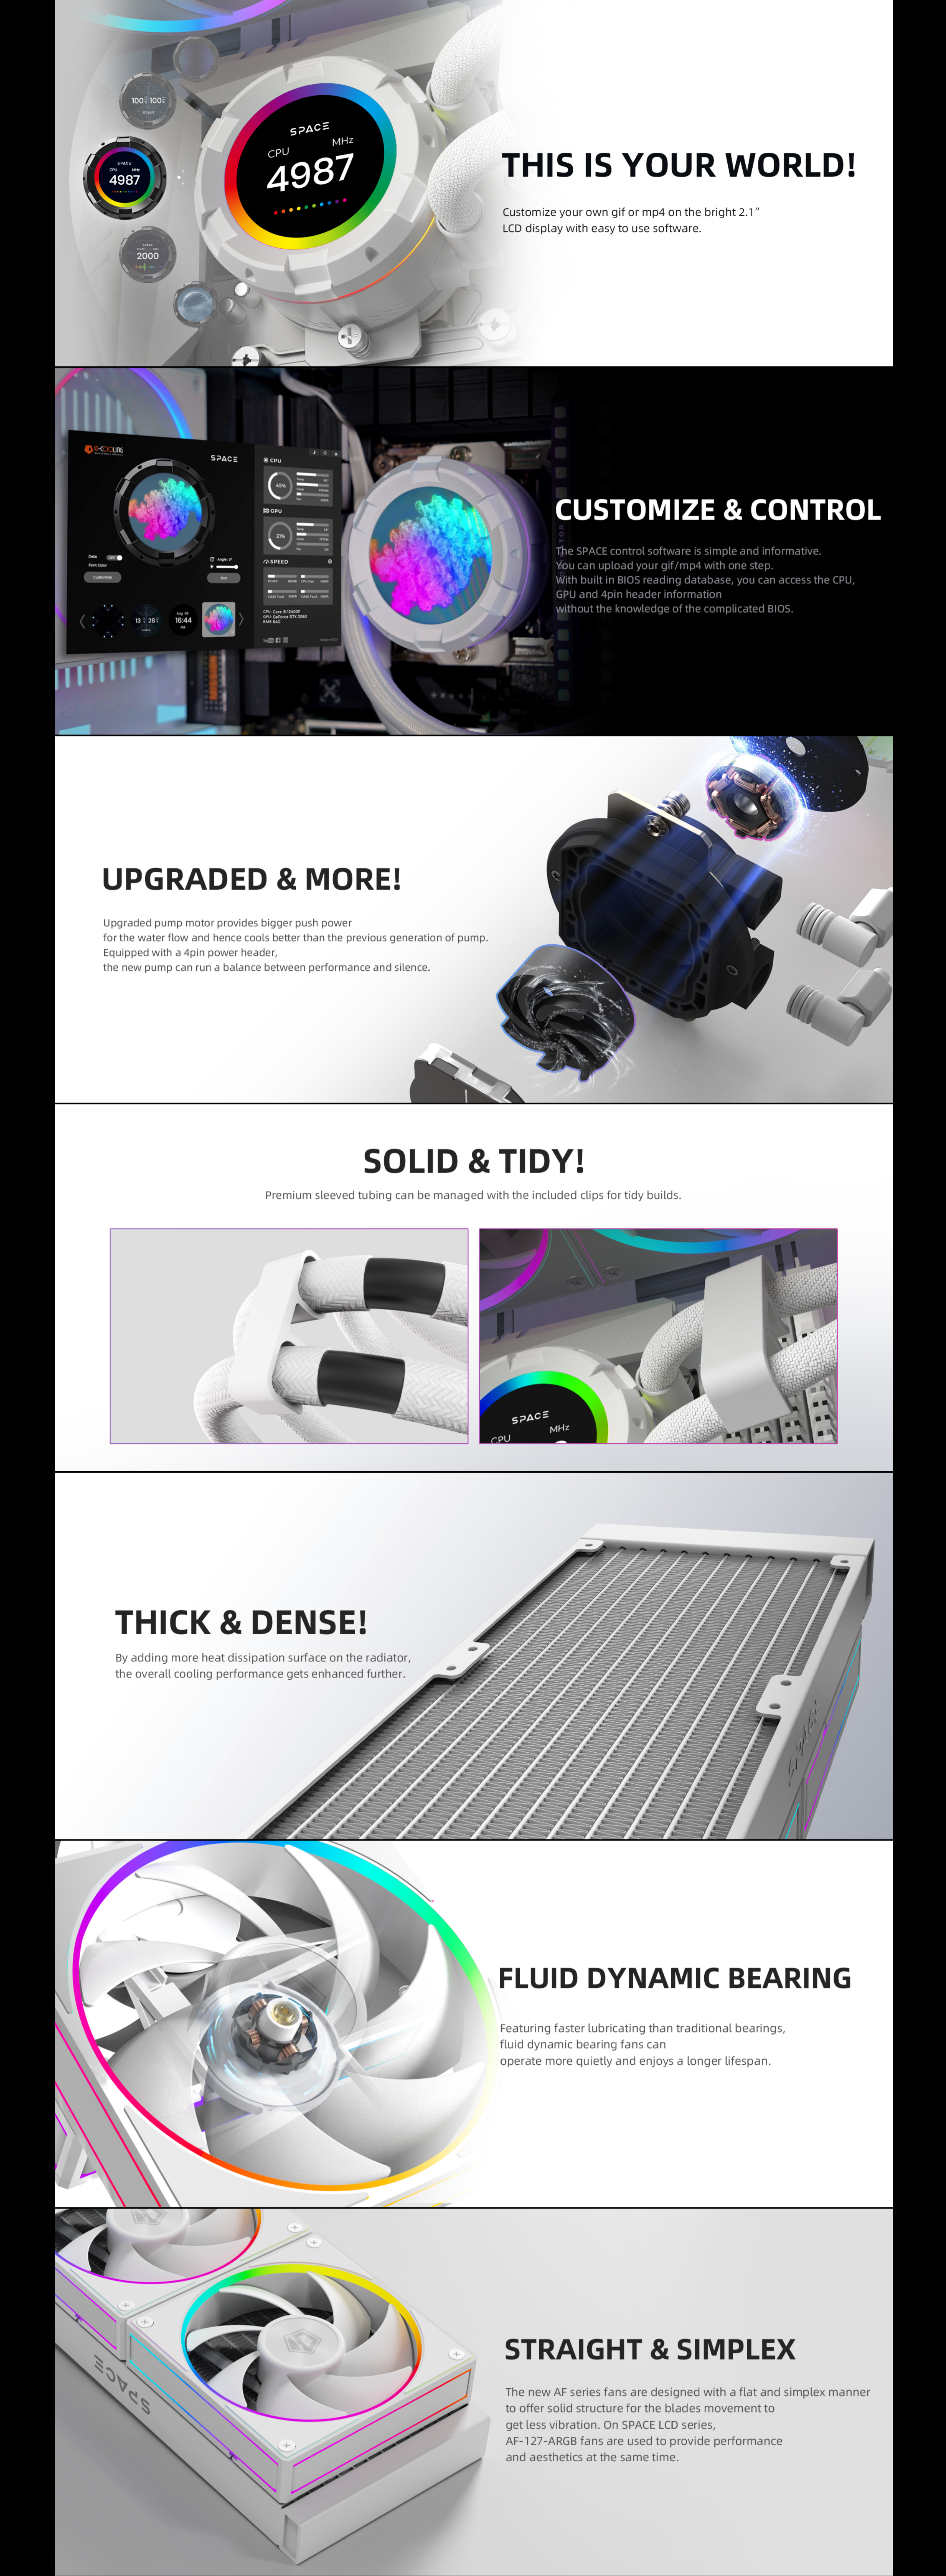 A large marketing image providing additional information about the product ID-COOLING Space LCD 240mm AIO CPU Liquid Cooler - White - Additional alt info not provided